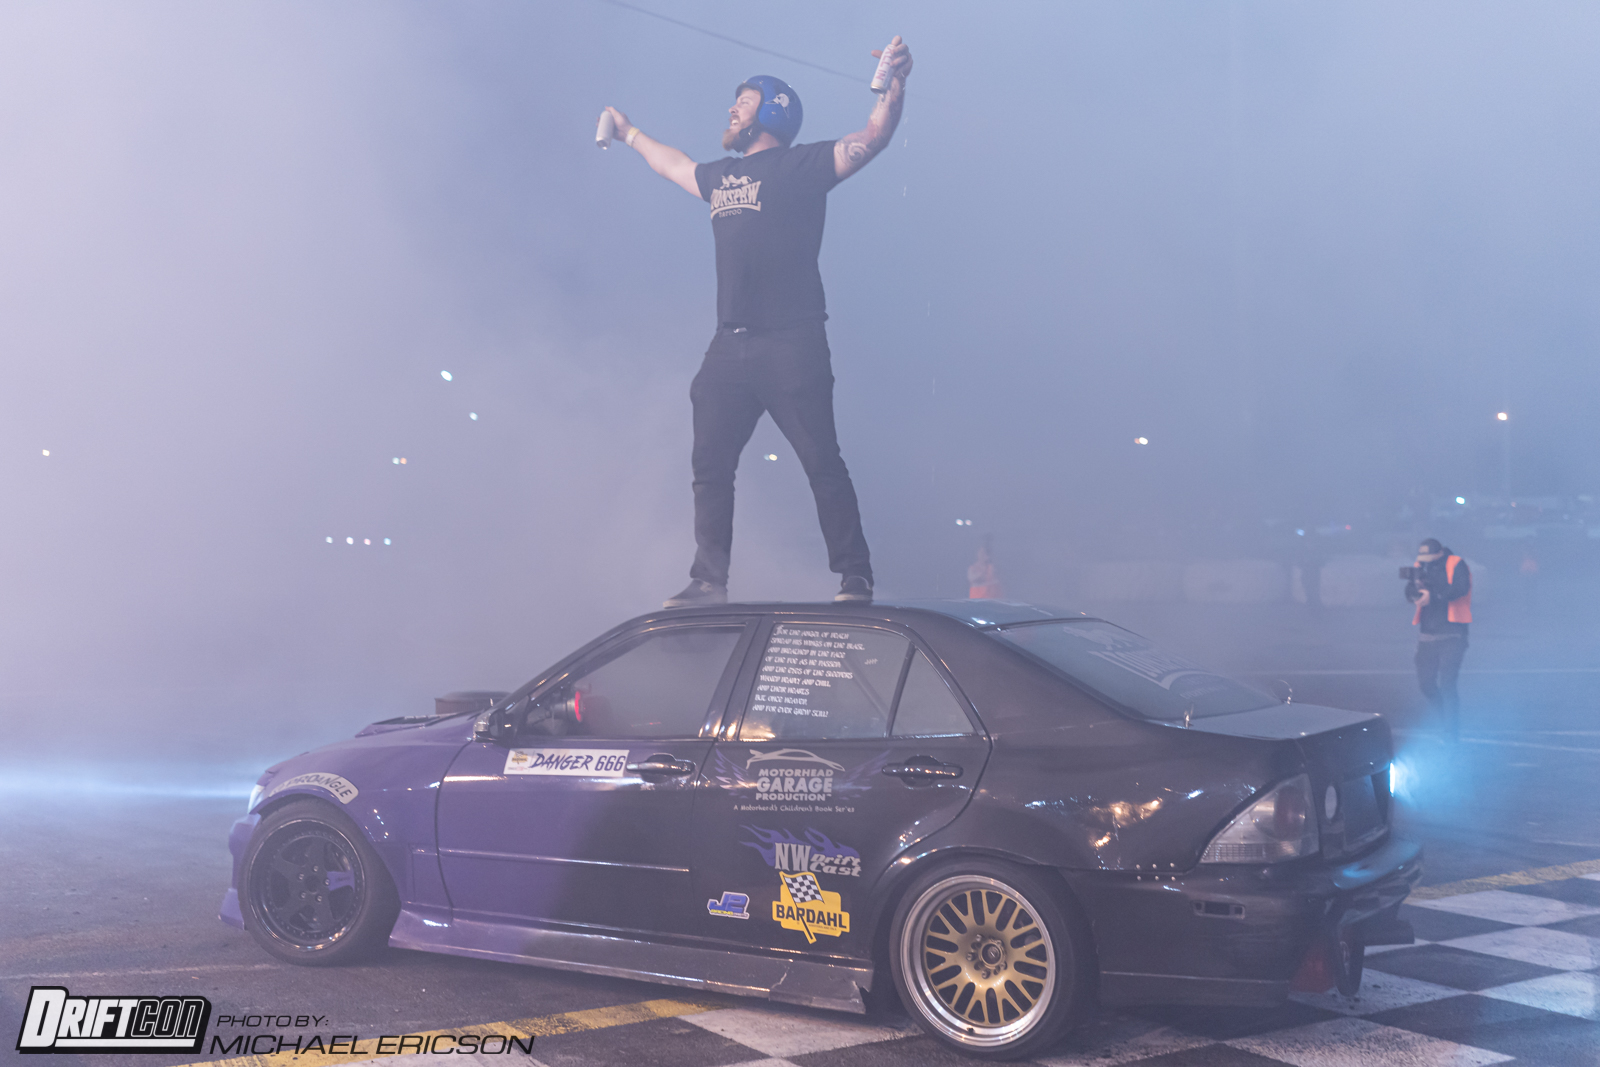 Crewsade to offer passenger drift experiences at this year's show